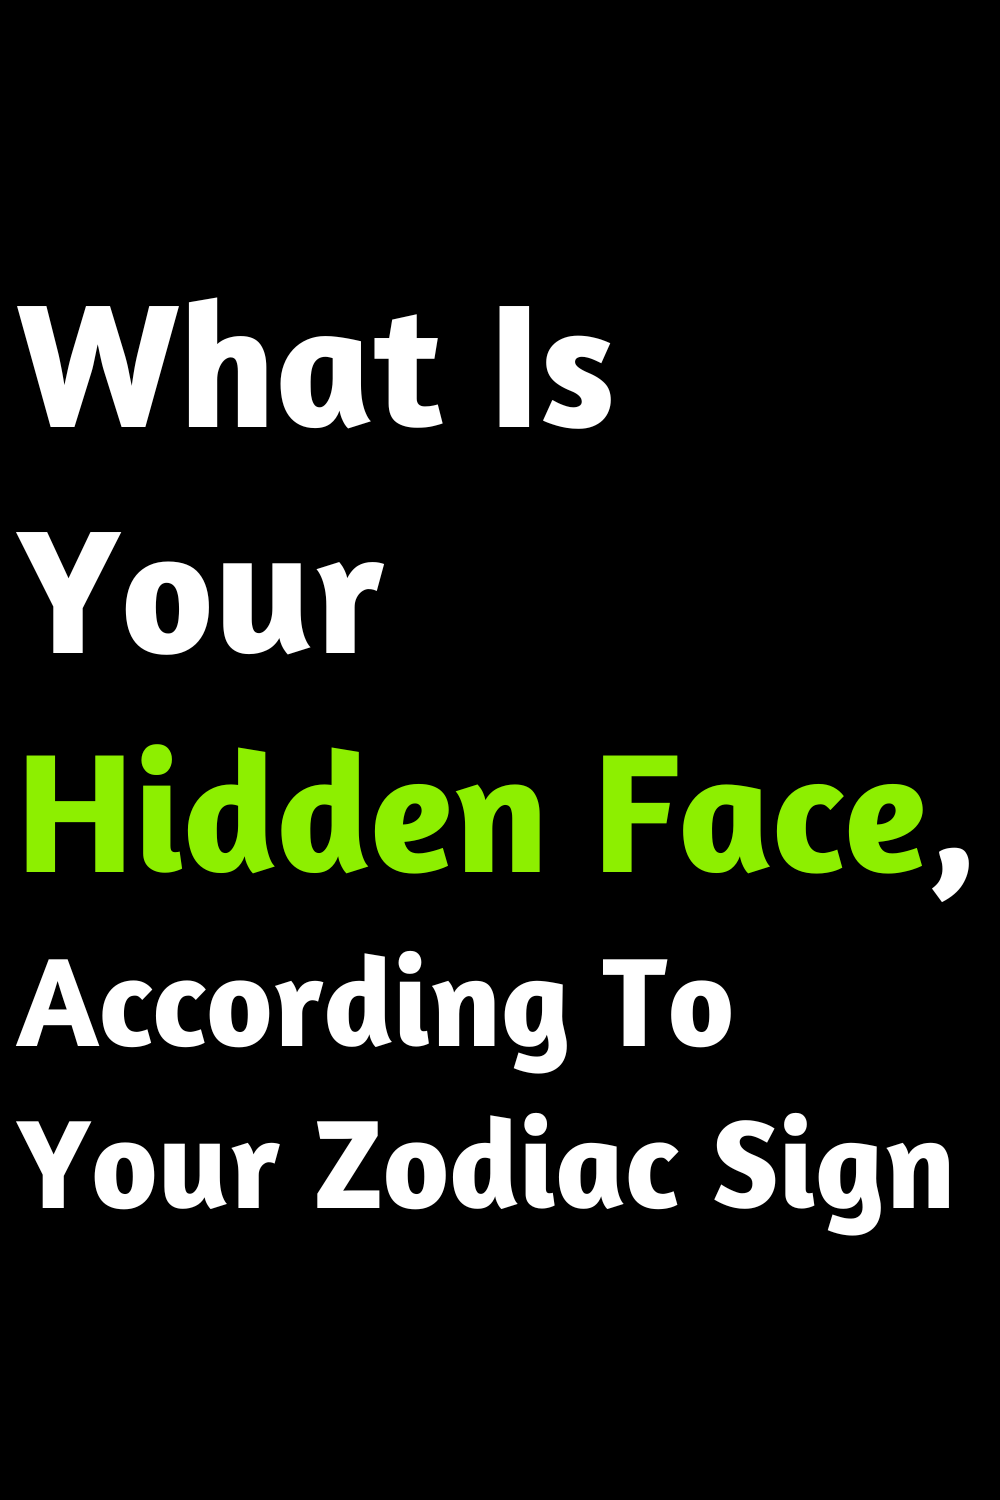 What Is Your Hidden Face, According To Your Zodiac Sign